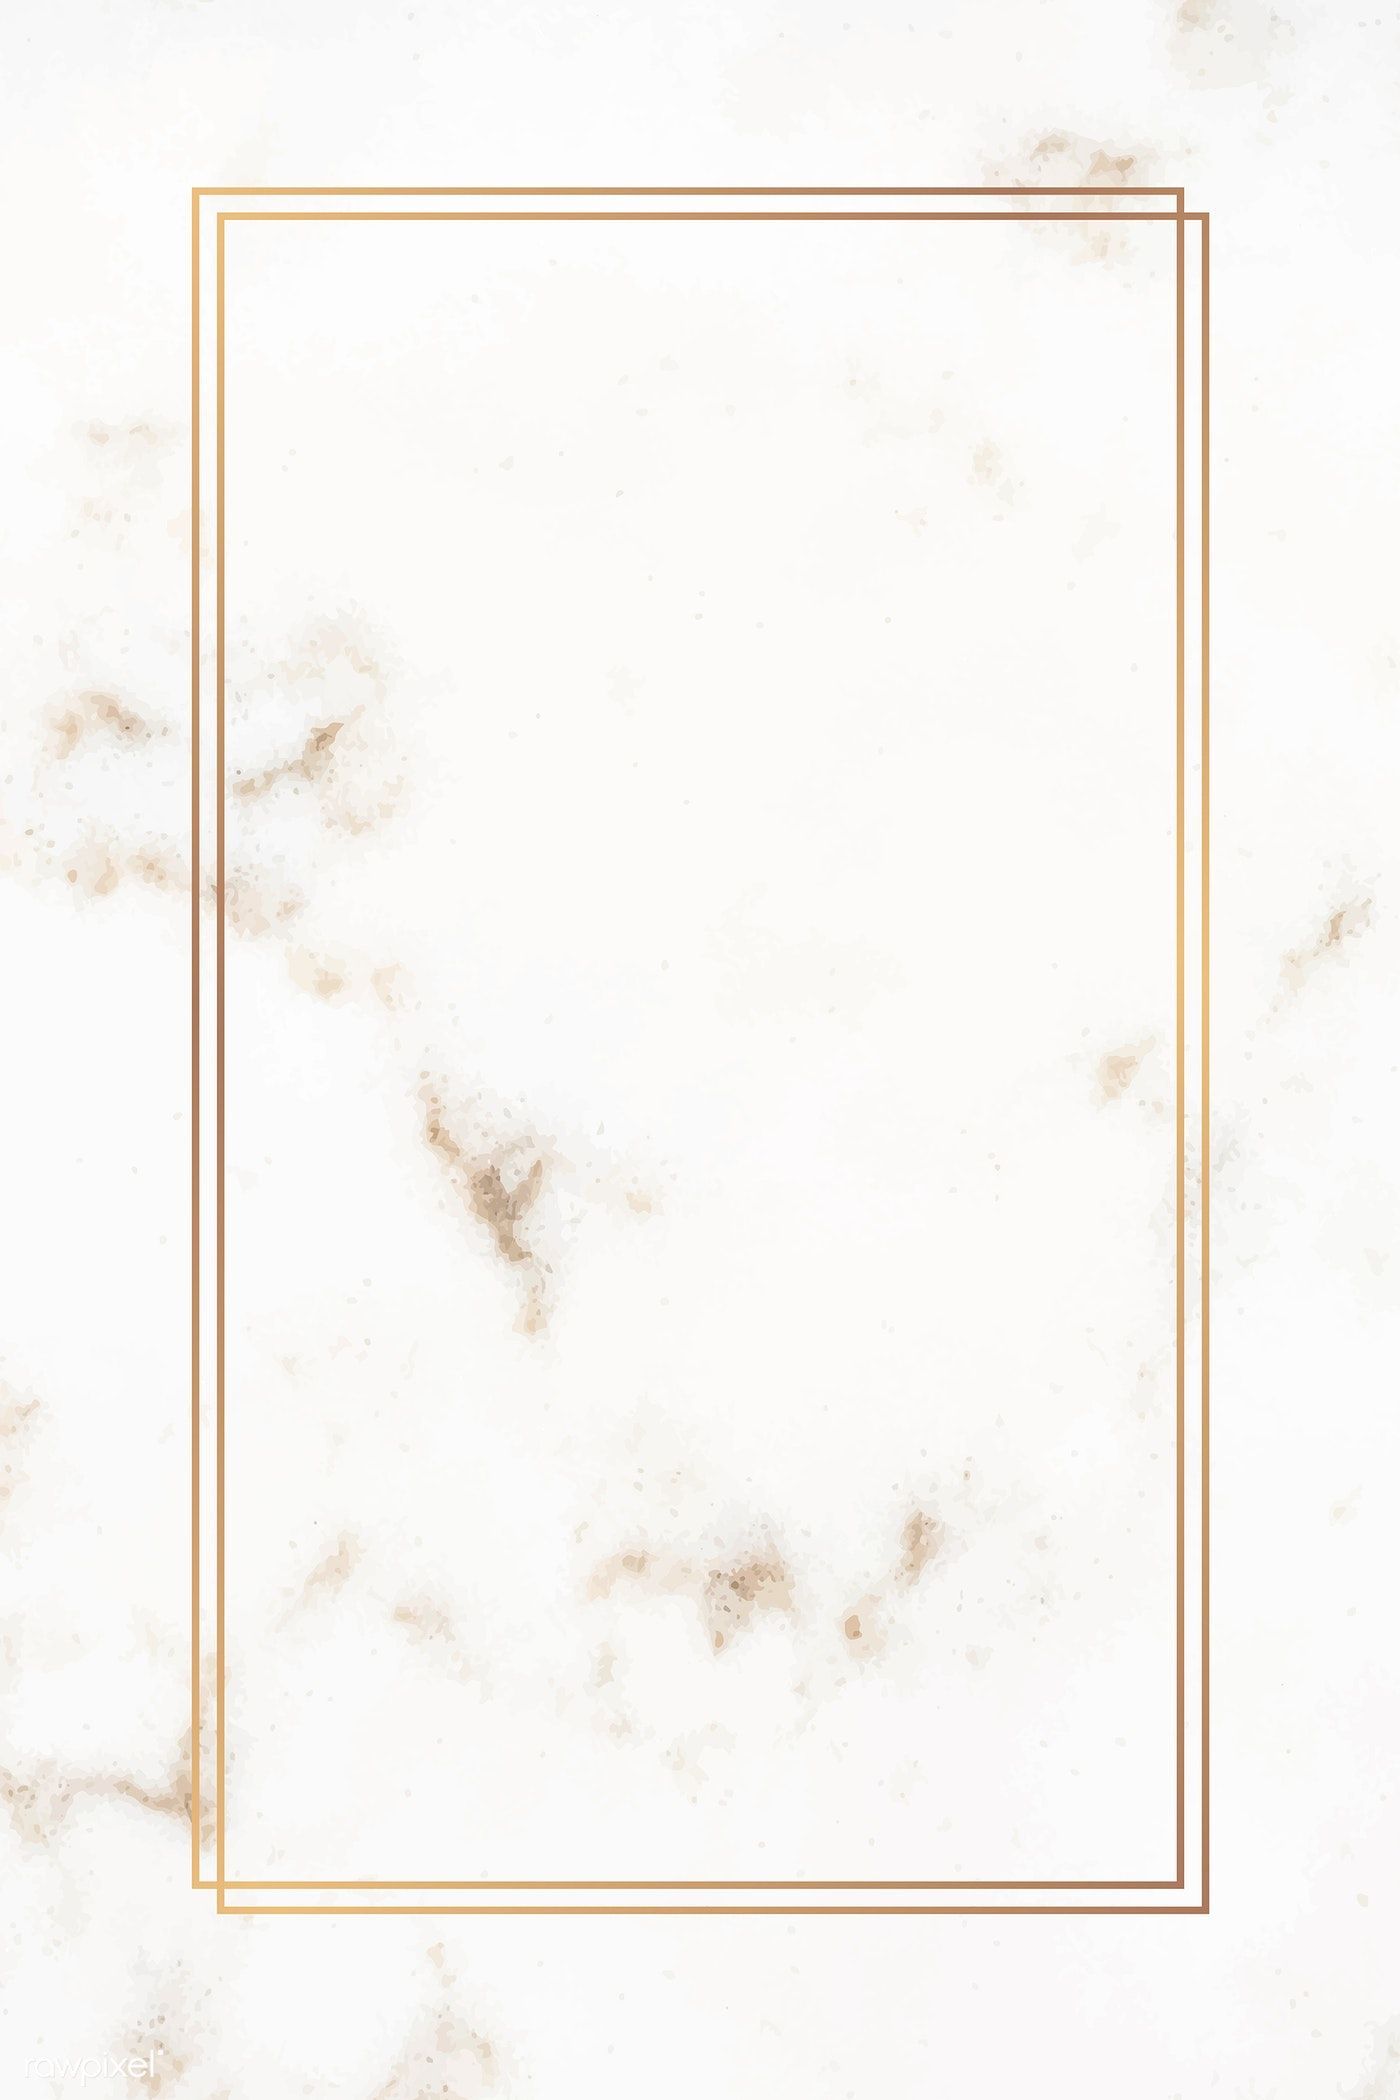 Download premium vector of Rectangle gold frame on a marble vector 1214997. Gold wallpaper background, Phone wallpaper image, Wallpaper background